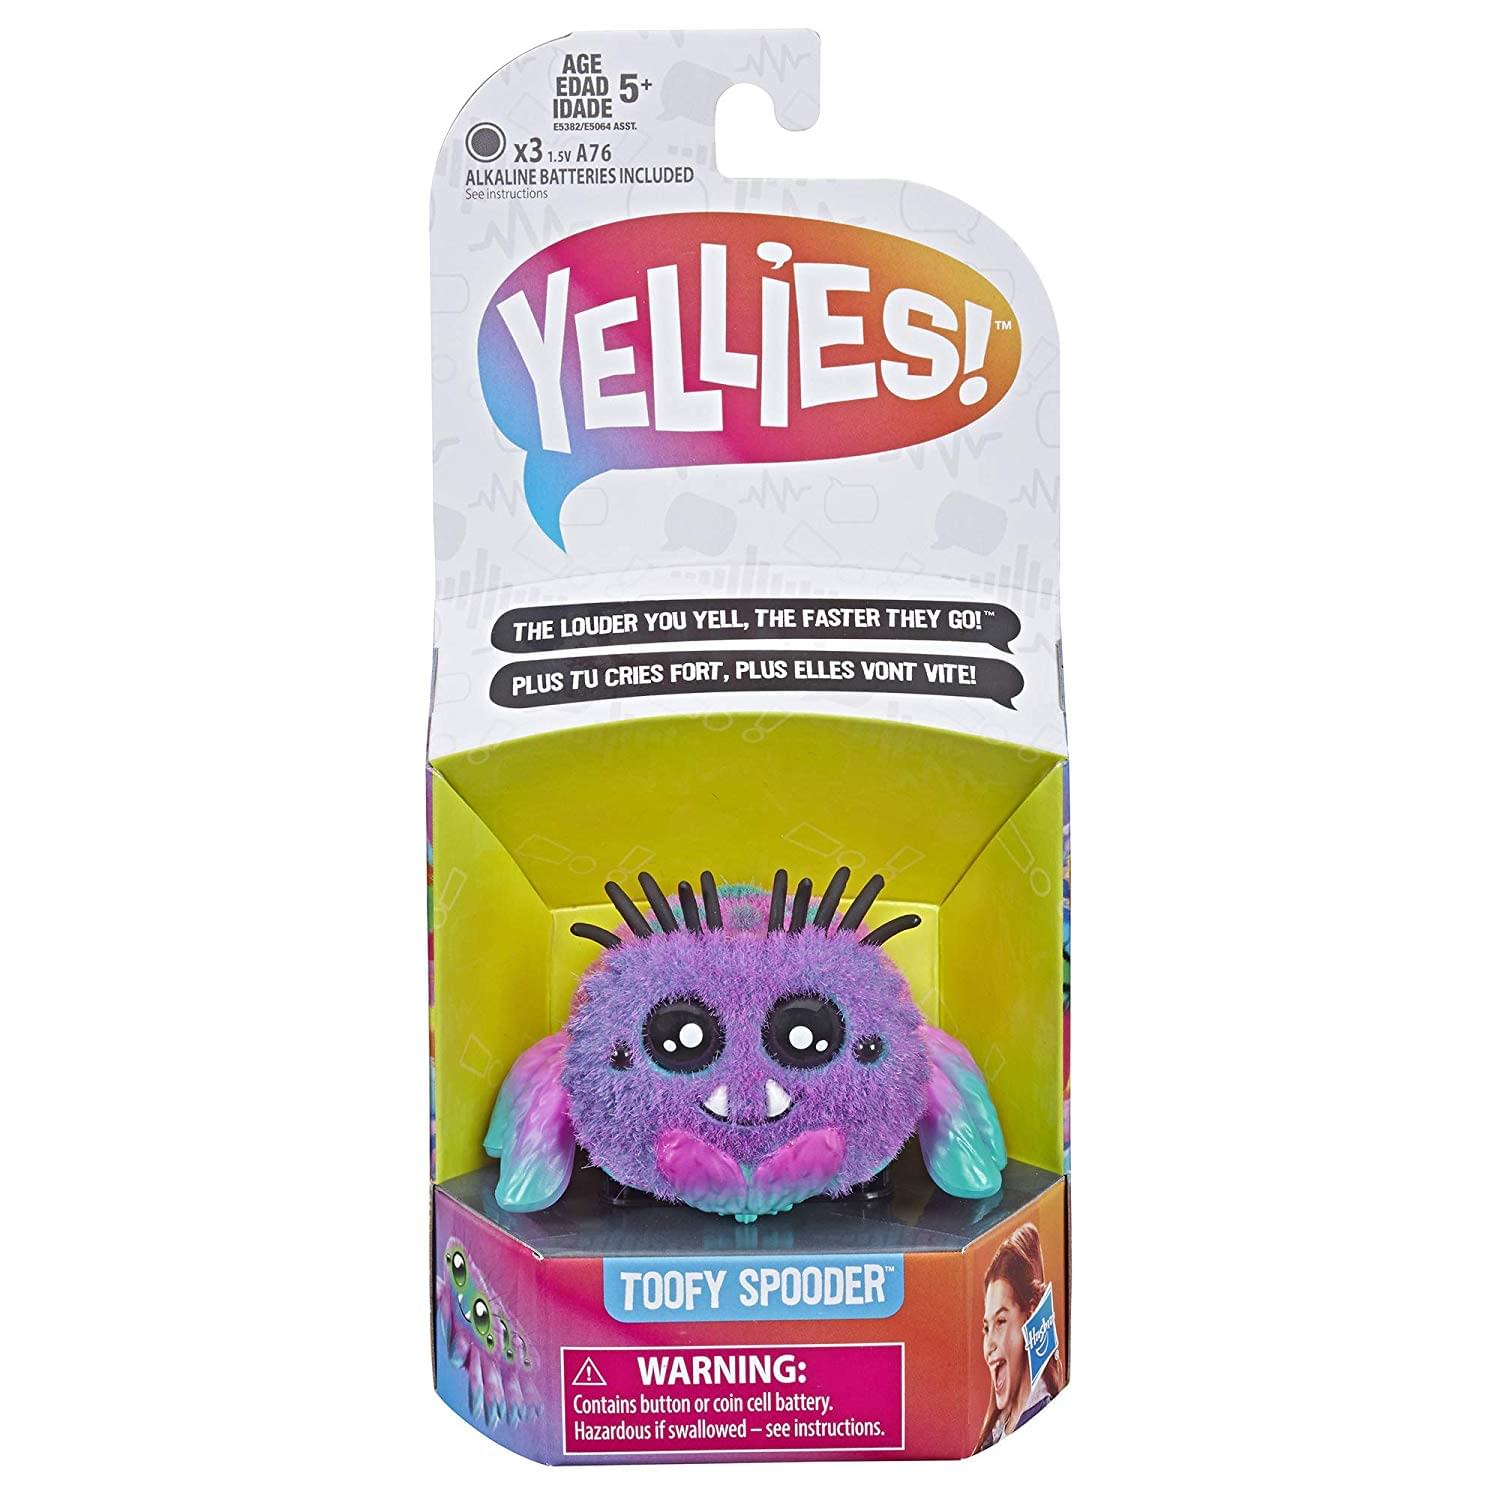 Yellies! Voice & Sound Activated Electronic Spider Pet - Toofy